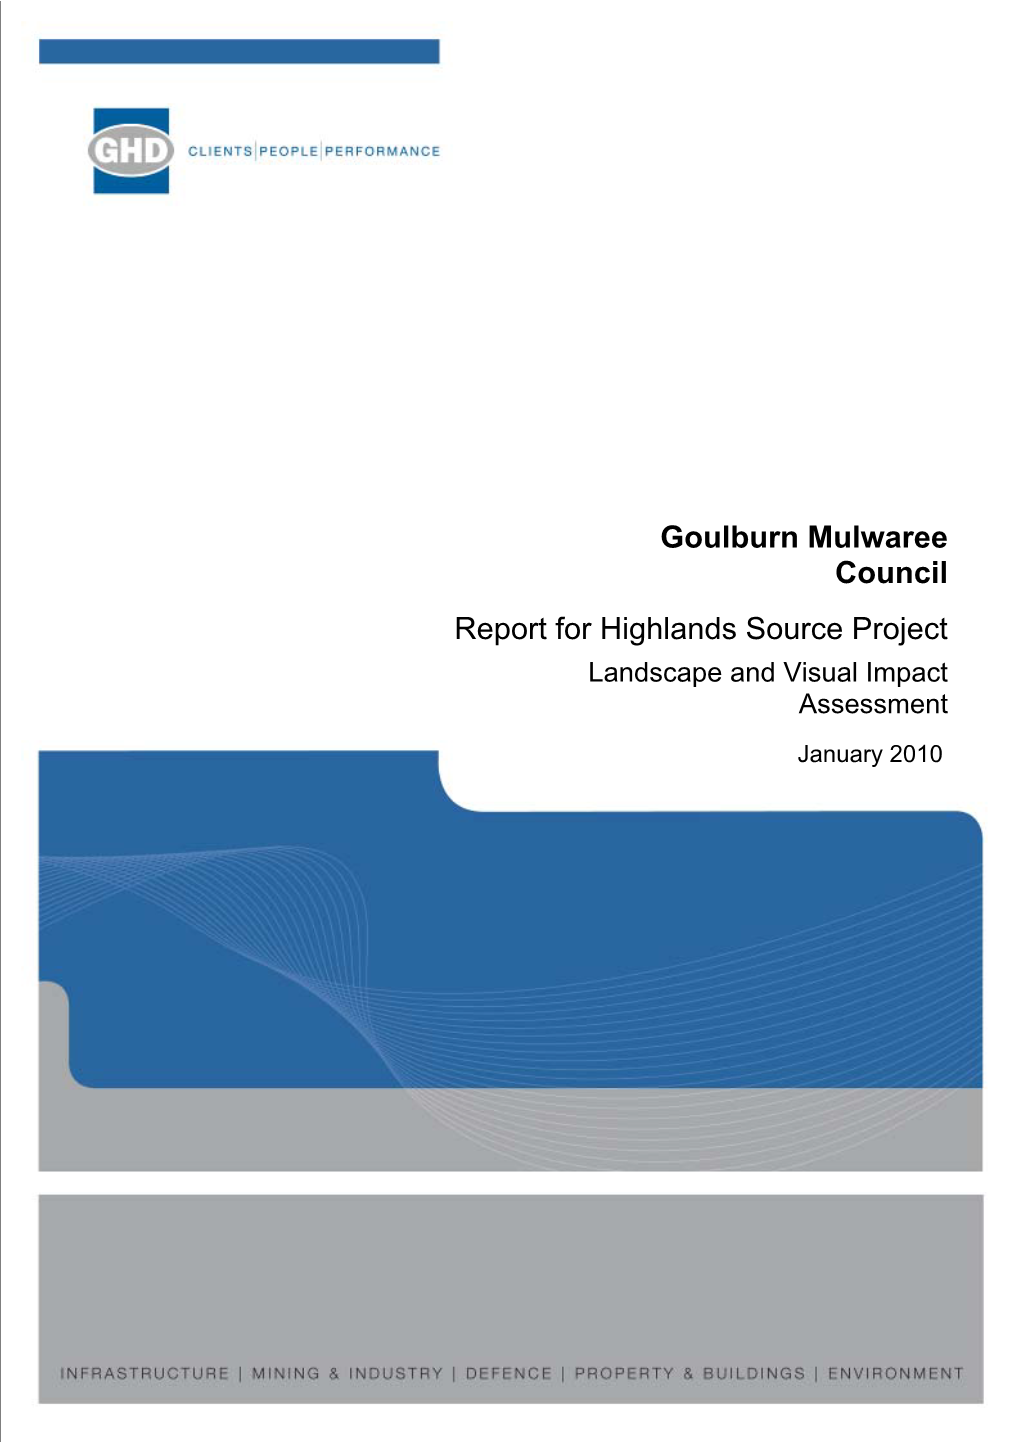 Goulburn Mulwaree Council Report for Highlands Source Project Landscape and Visual Impact Assessment